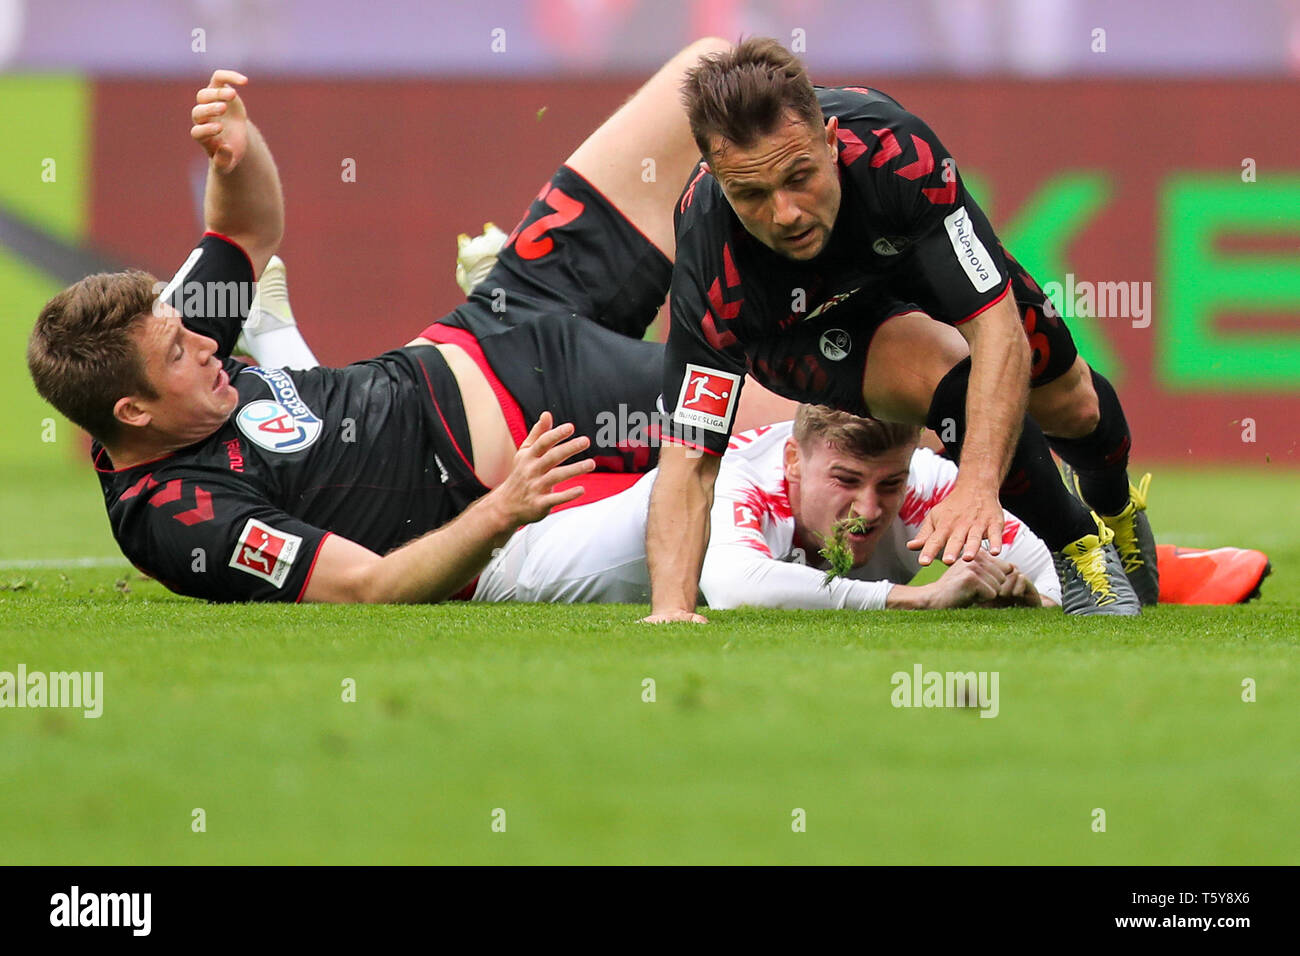 Leipzig, Germany. 27th Apr, 2019. Soccer: Bundesliga, 31st matchday, RB Leipzig - SC Freiburg in der Red-Bull-Arena Leipzig. Leipzig's Timo Werner (M) is stopped rudely by Freiburg's Dominique Heintz (l) and Amir Abrashi. Credit: Jan Woitas/dpa-Zentralbild/dpa - IMPORTANT NOTE: In accordance with the requirements of the DFL Deutsche Fußball Liga or the DFB Deutscher Fußball-Bund, it is prohibited to use or have used photographs taken in the stadium and/or the match in the form of sequence images and/or video-like photo sequences./dpa/Alamy Live News Stock Photo